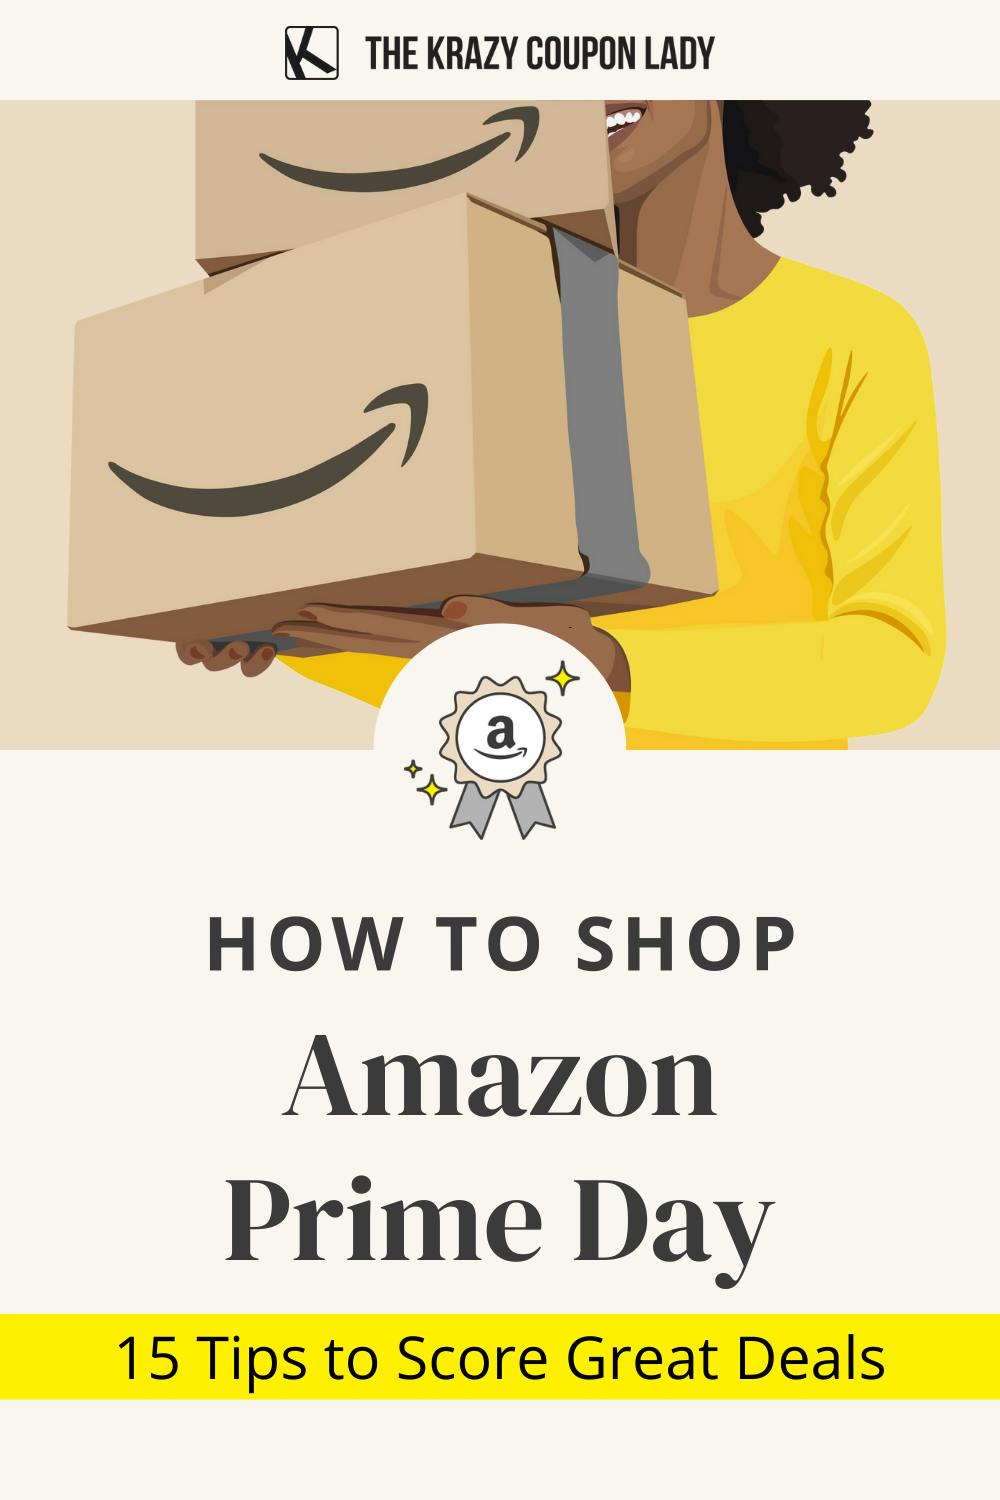 17 Shopping Tips for Amazon Prime Day in July